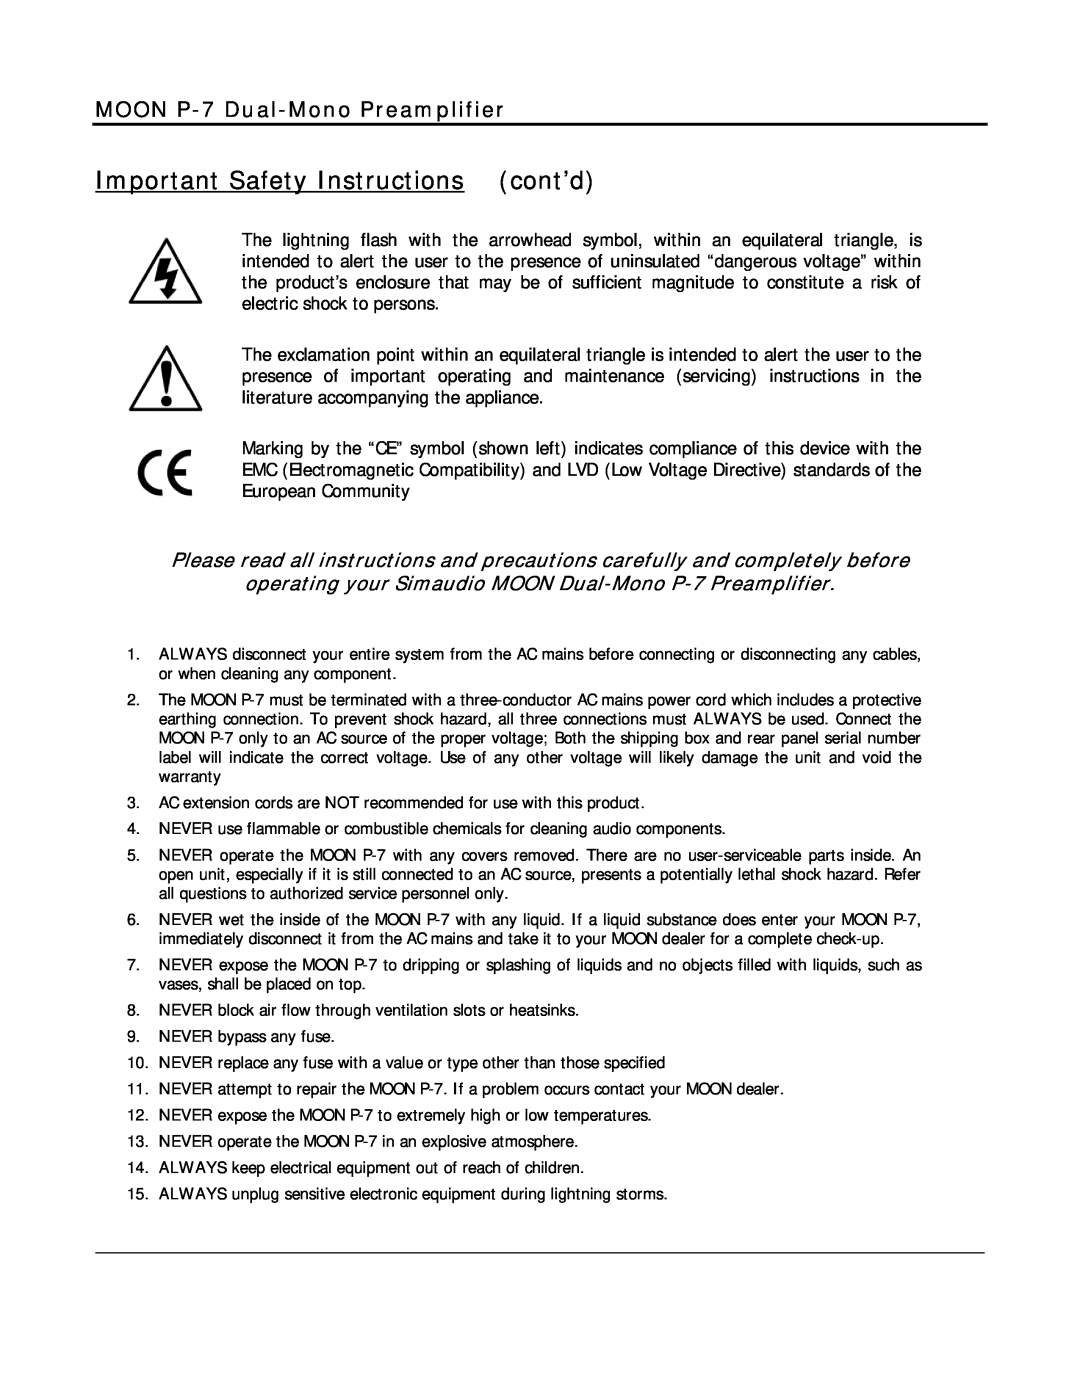 Simaudio owner manual Important Safety Instructionscont’d, MOON P-7 Dual-MonoPreamplifier 